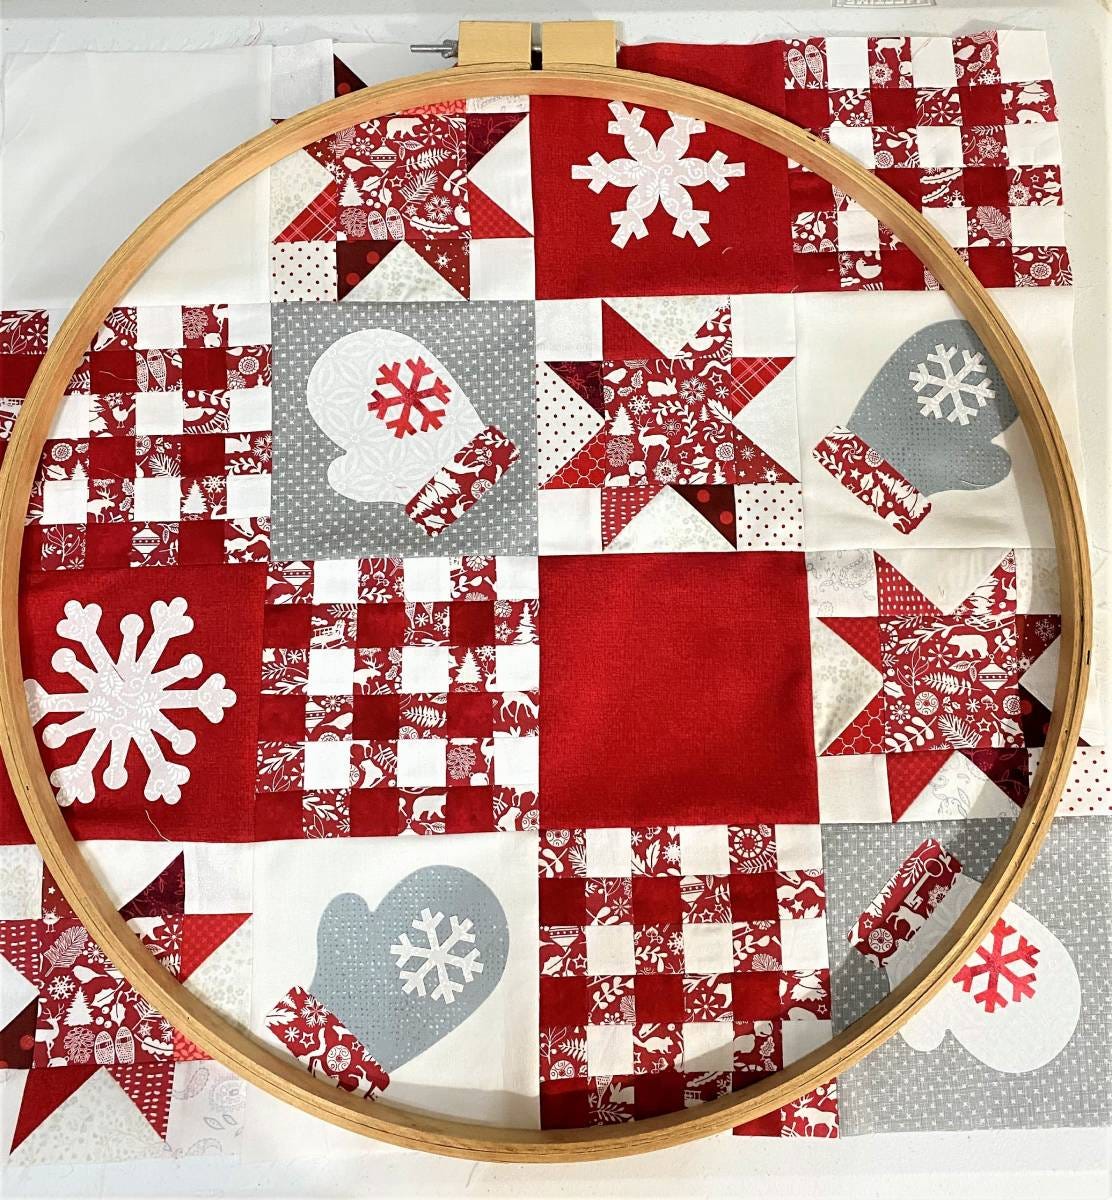 patchwork larger than embroidery hoop-1